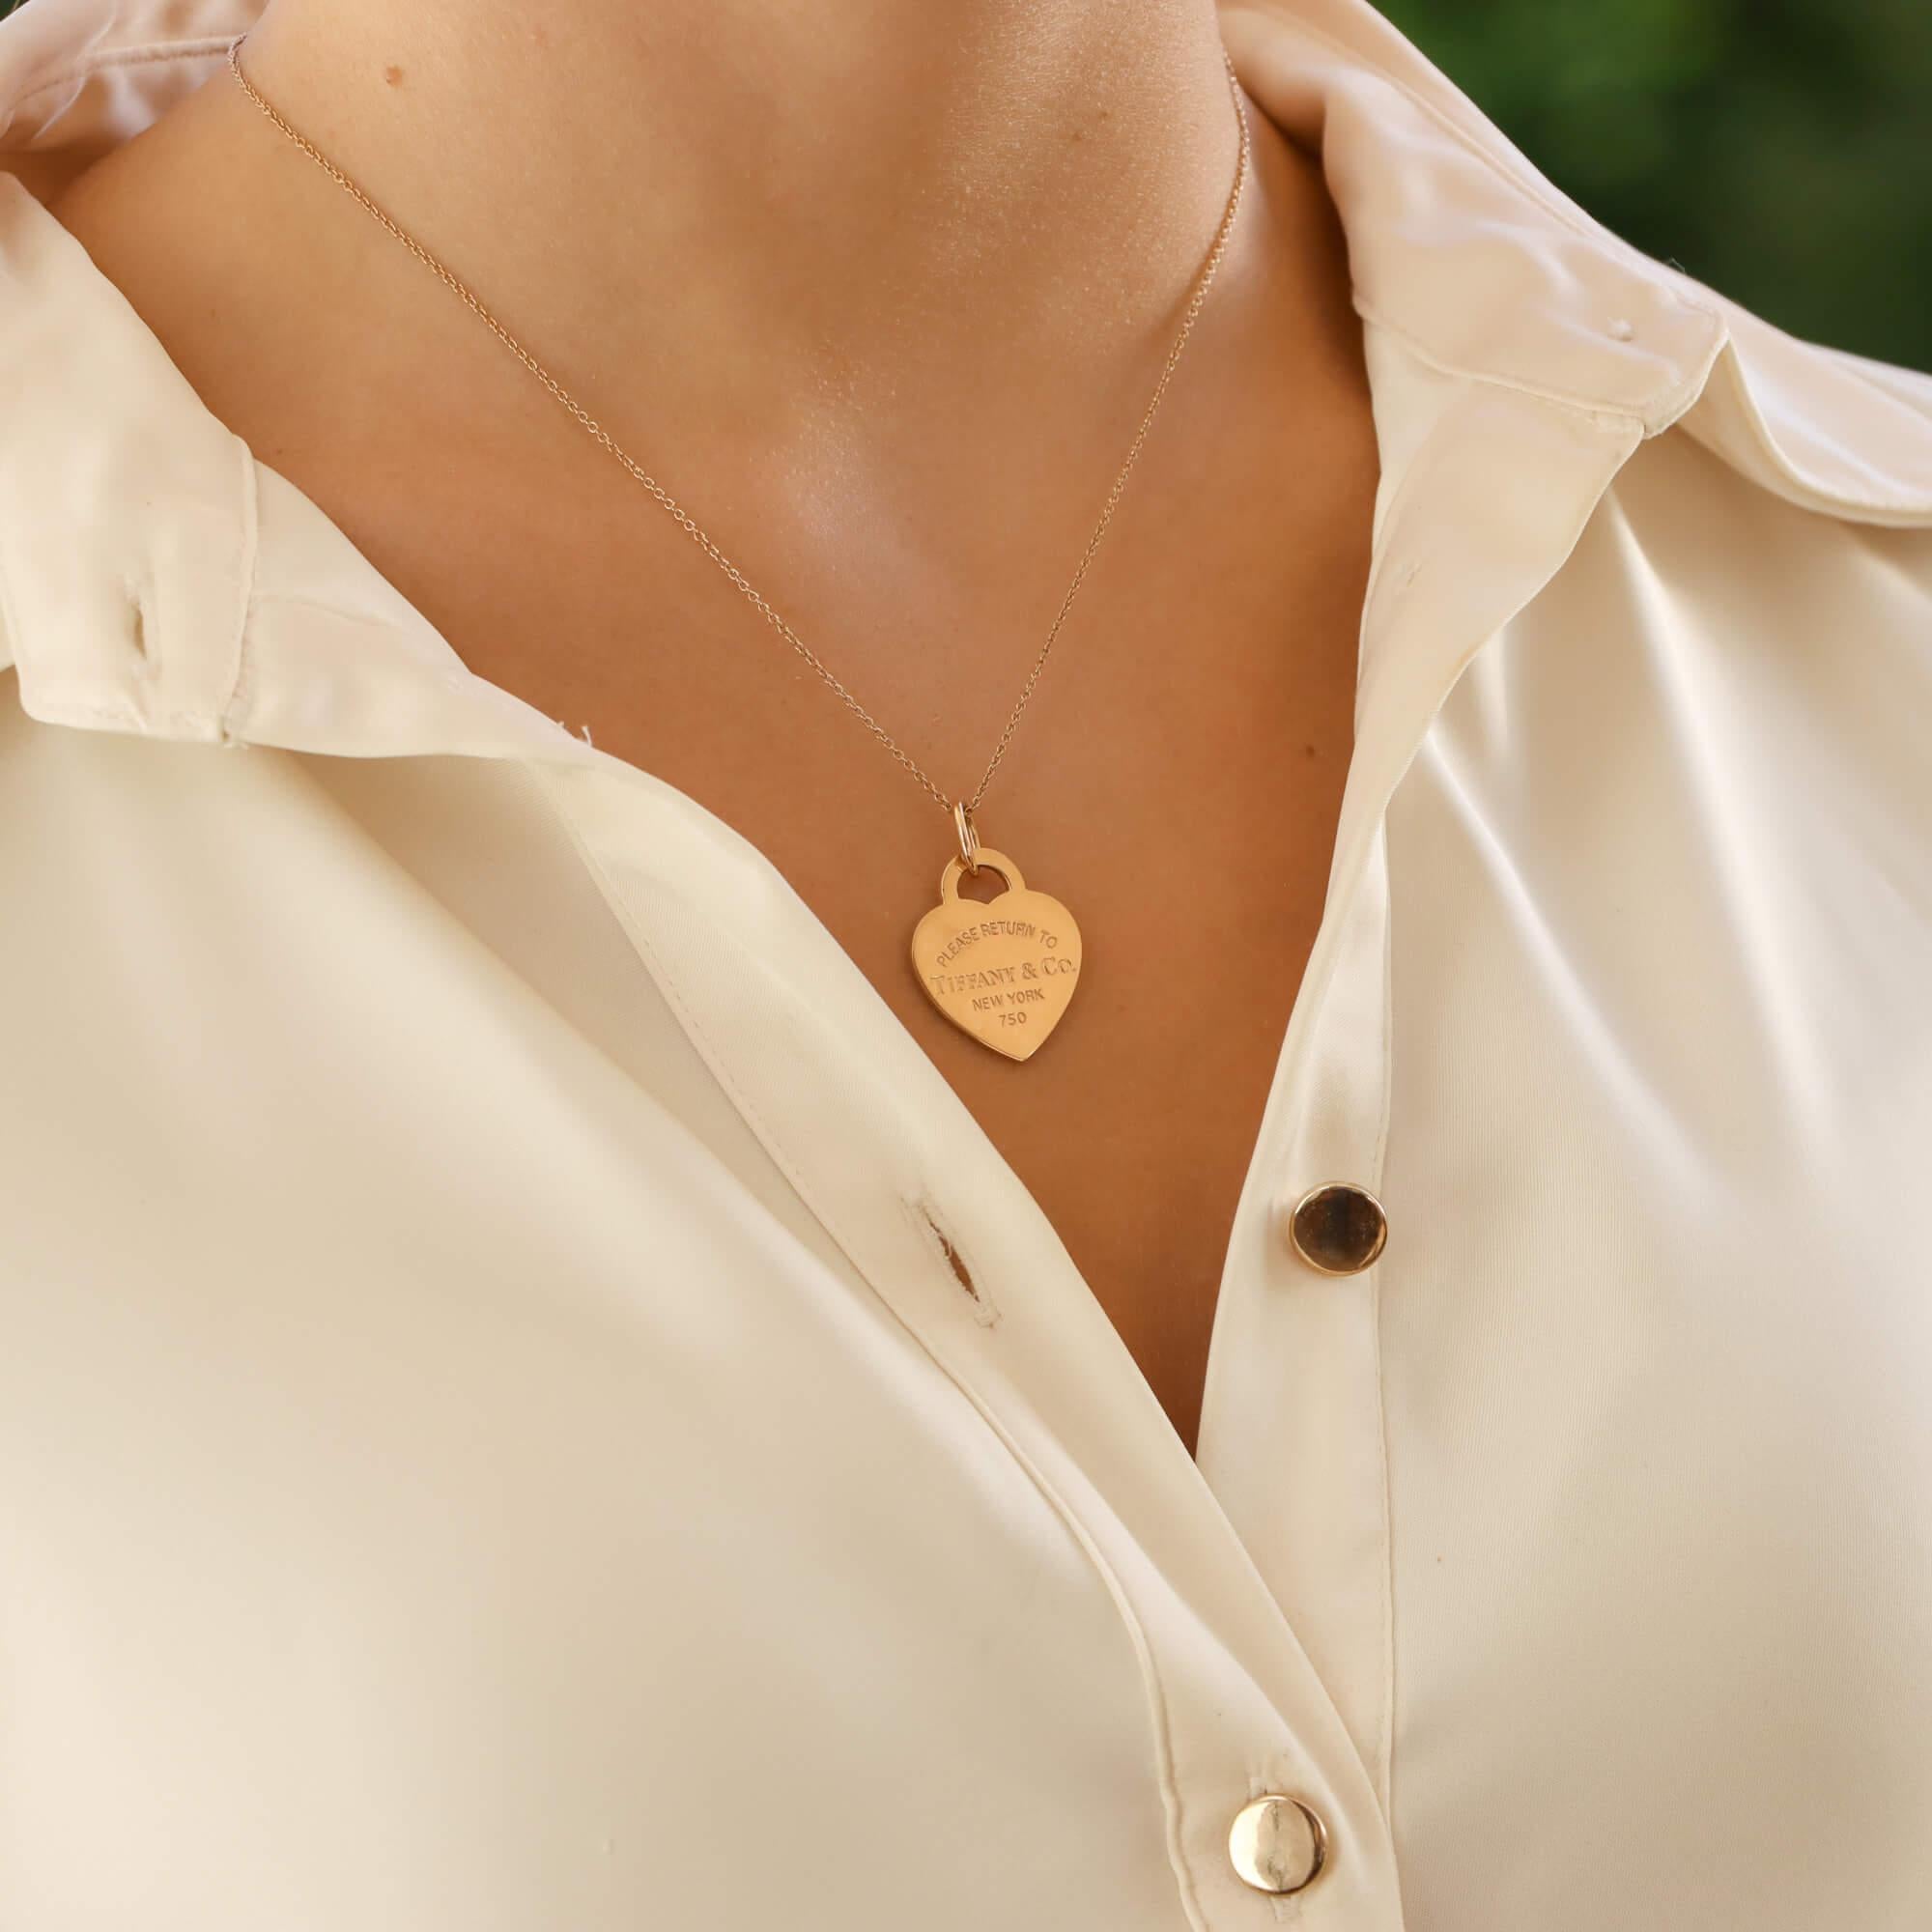 7020697 susannahlovis antique vintage jewellery vintage tiffany return to tiffany co heart tag pendant necklace in 18k rose gold IMG 3464 master